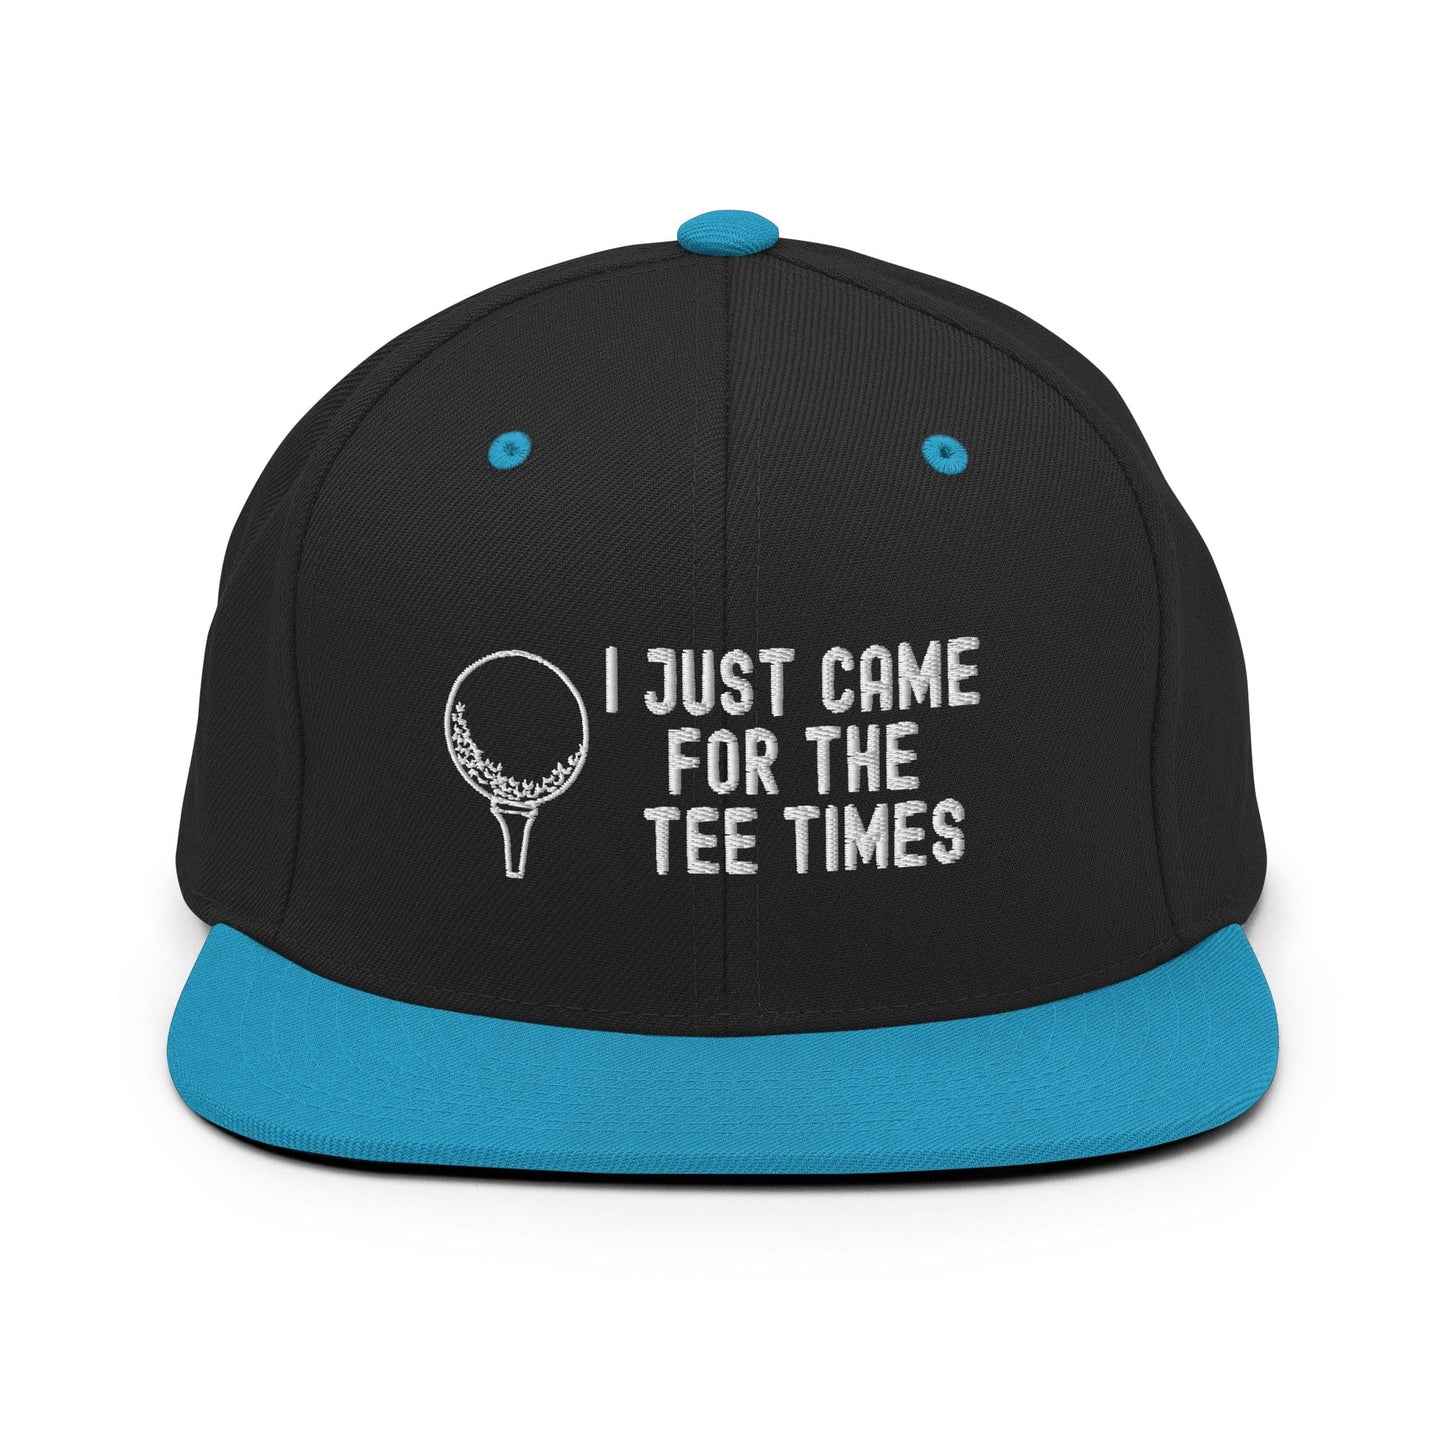 Funny Golfer Gifts  Snapback Hat Black/ Teal I Just Came For The Tee Times Snapback Hat